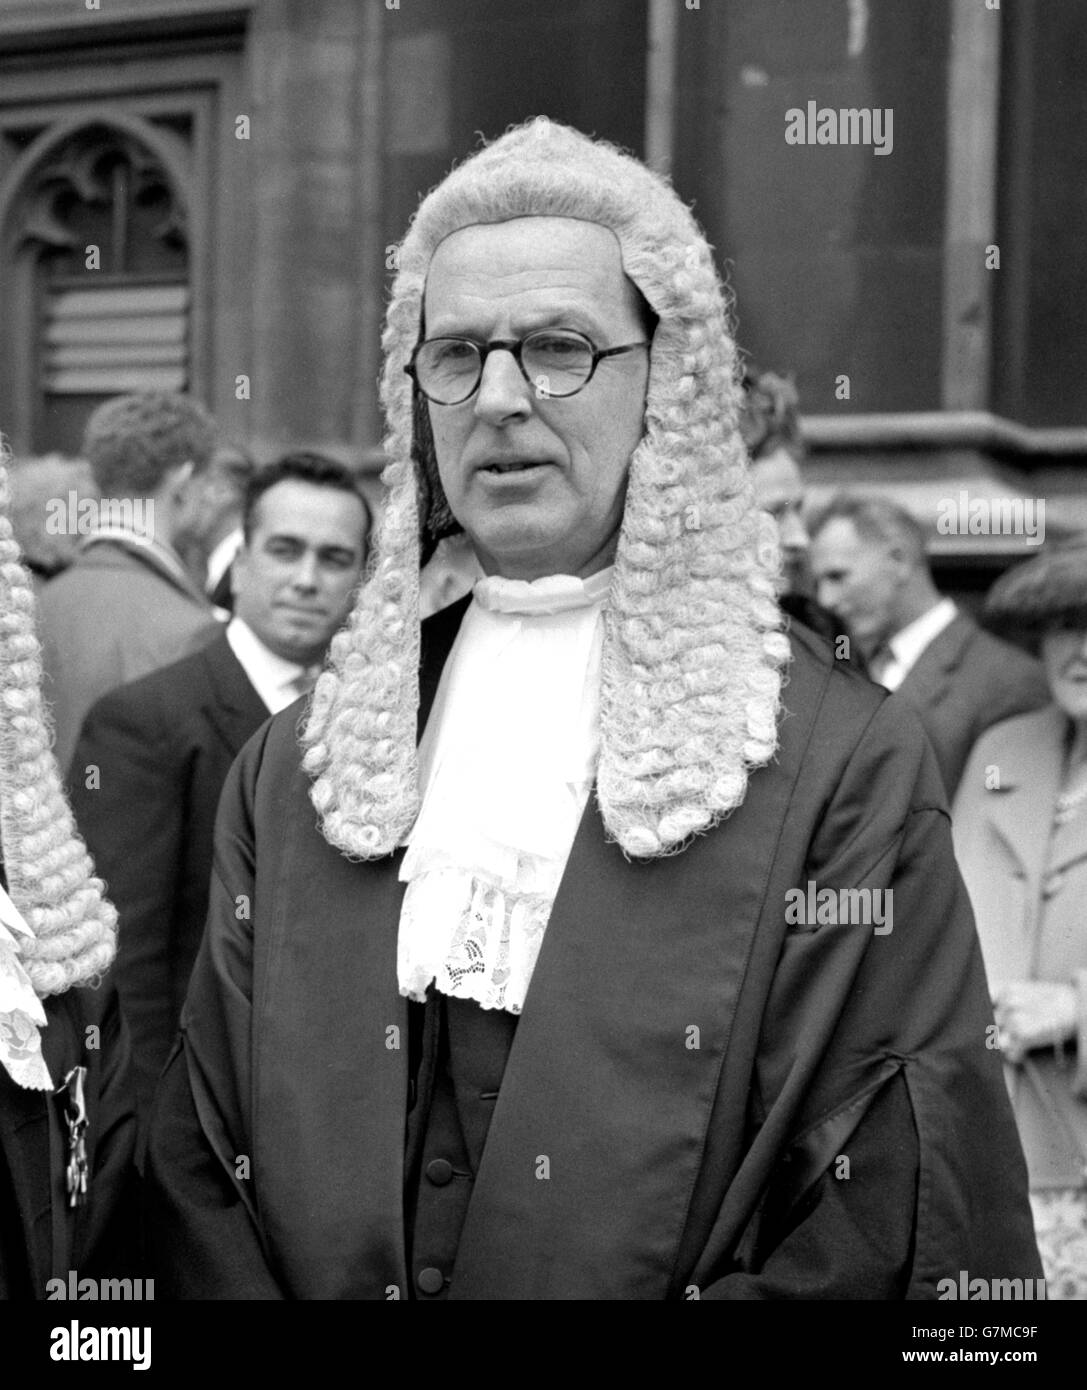 Jeremy Hutchinson, the barrister husband of actress Dame Peggy Ashcroft, leaves the House of Lords after being sworn in as a Queen's Counsel. Stock Photo